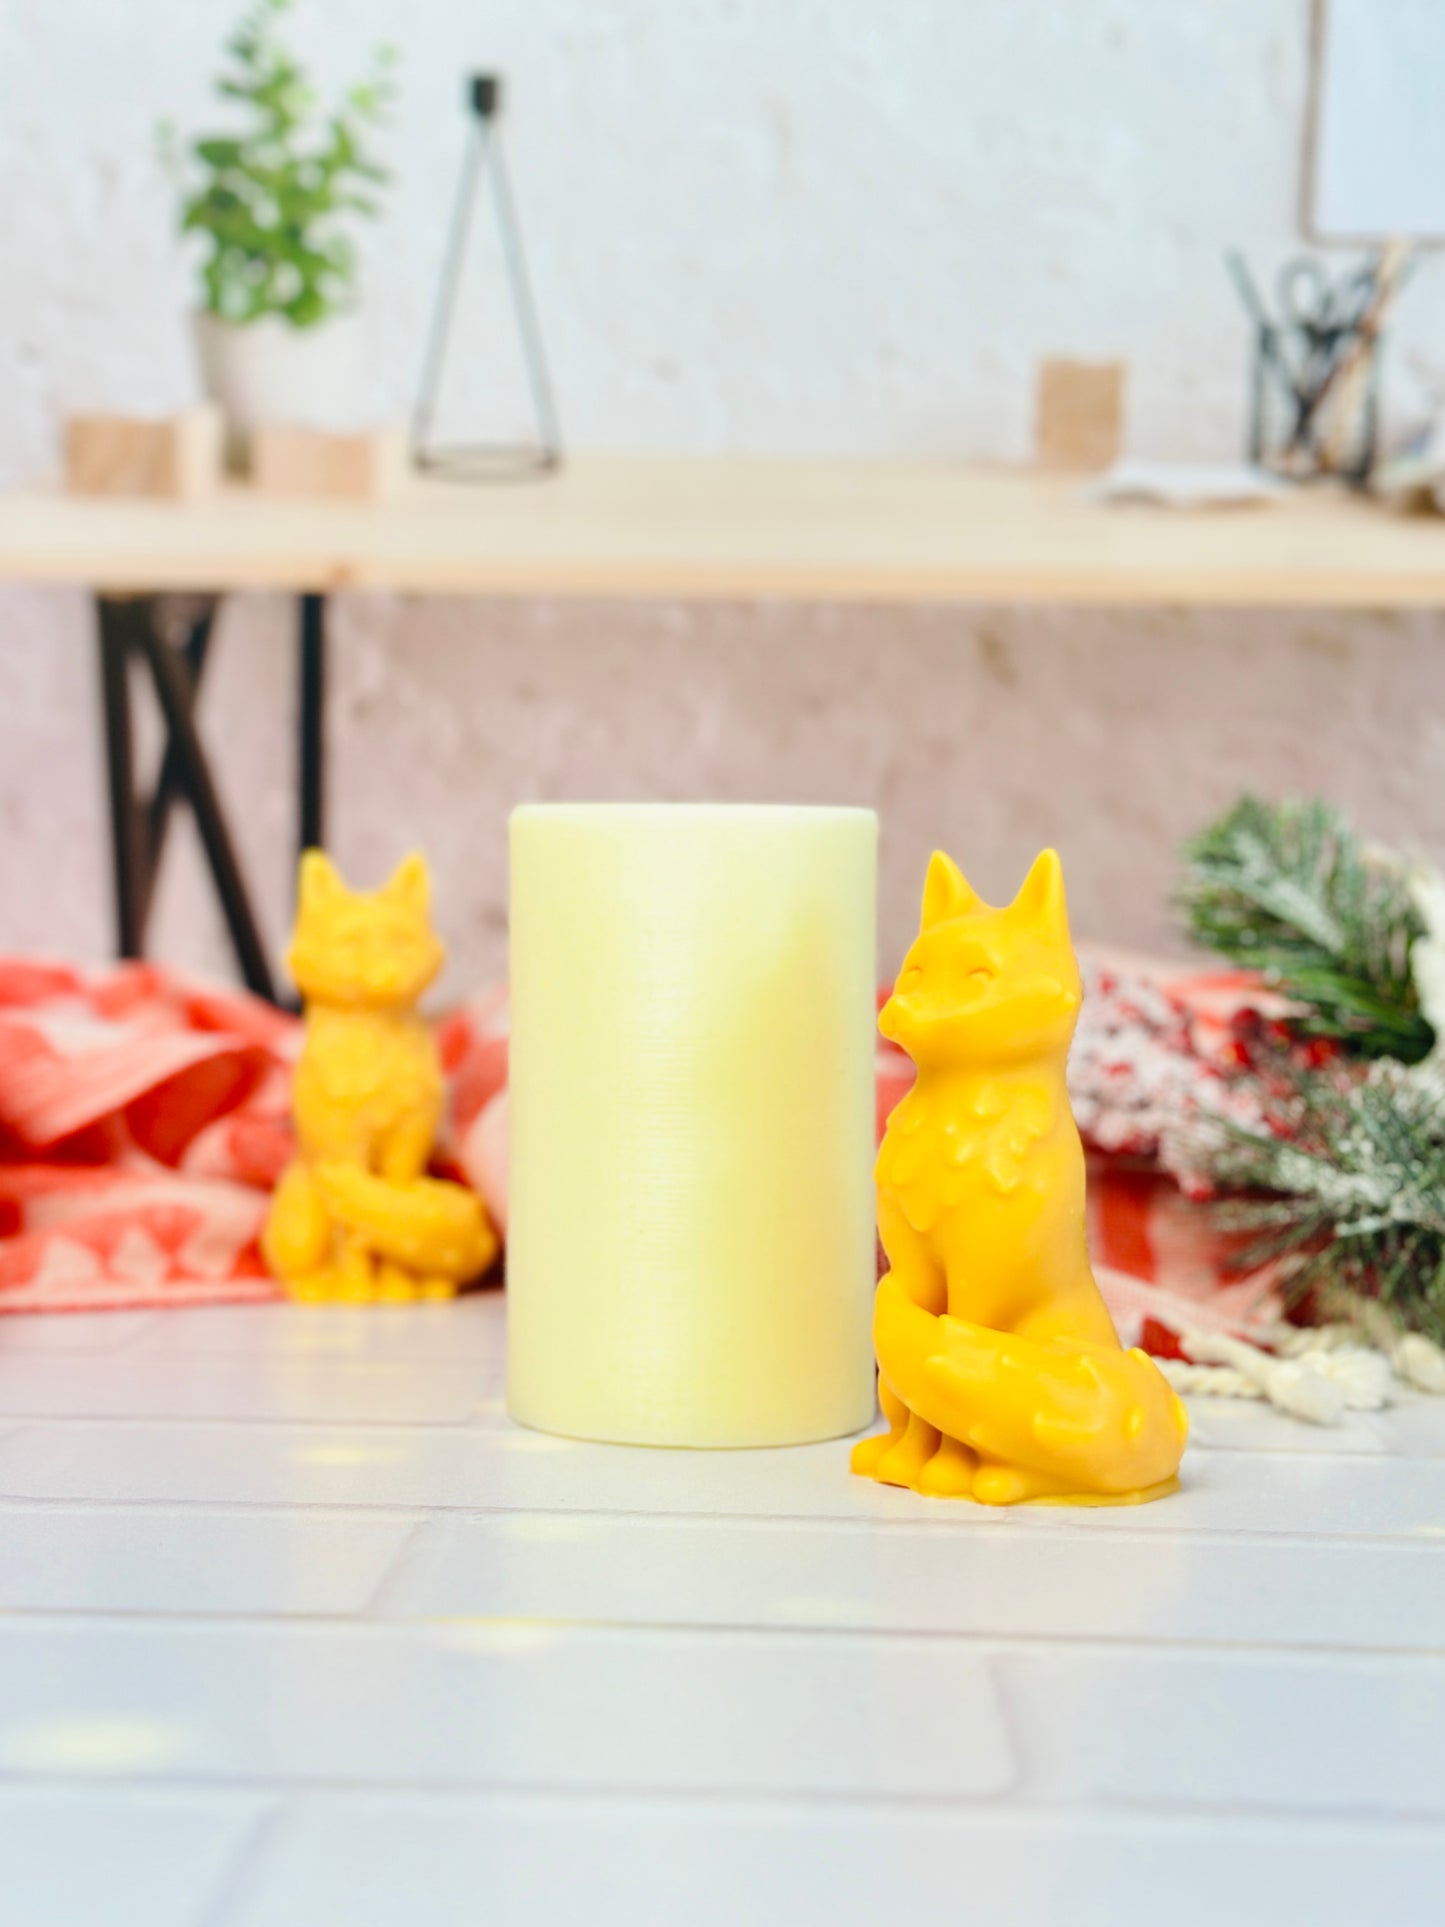 Fox Silicone Mold - Create Stunning Fox-Shaped Candles